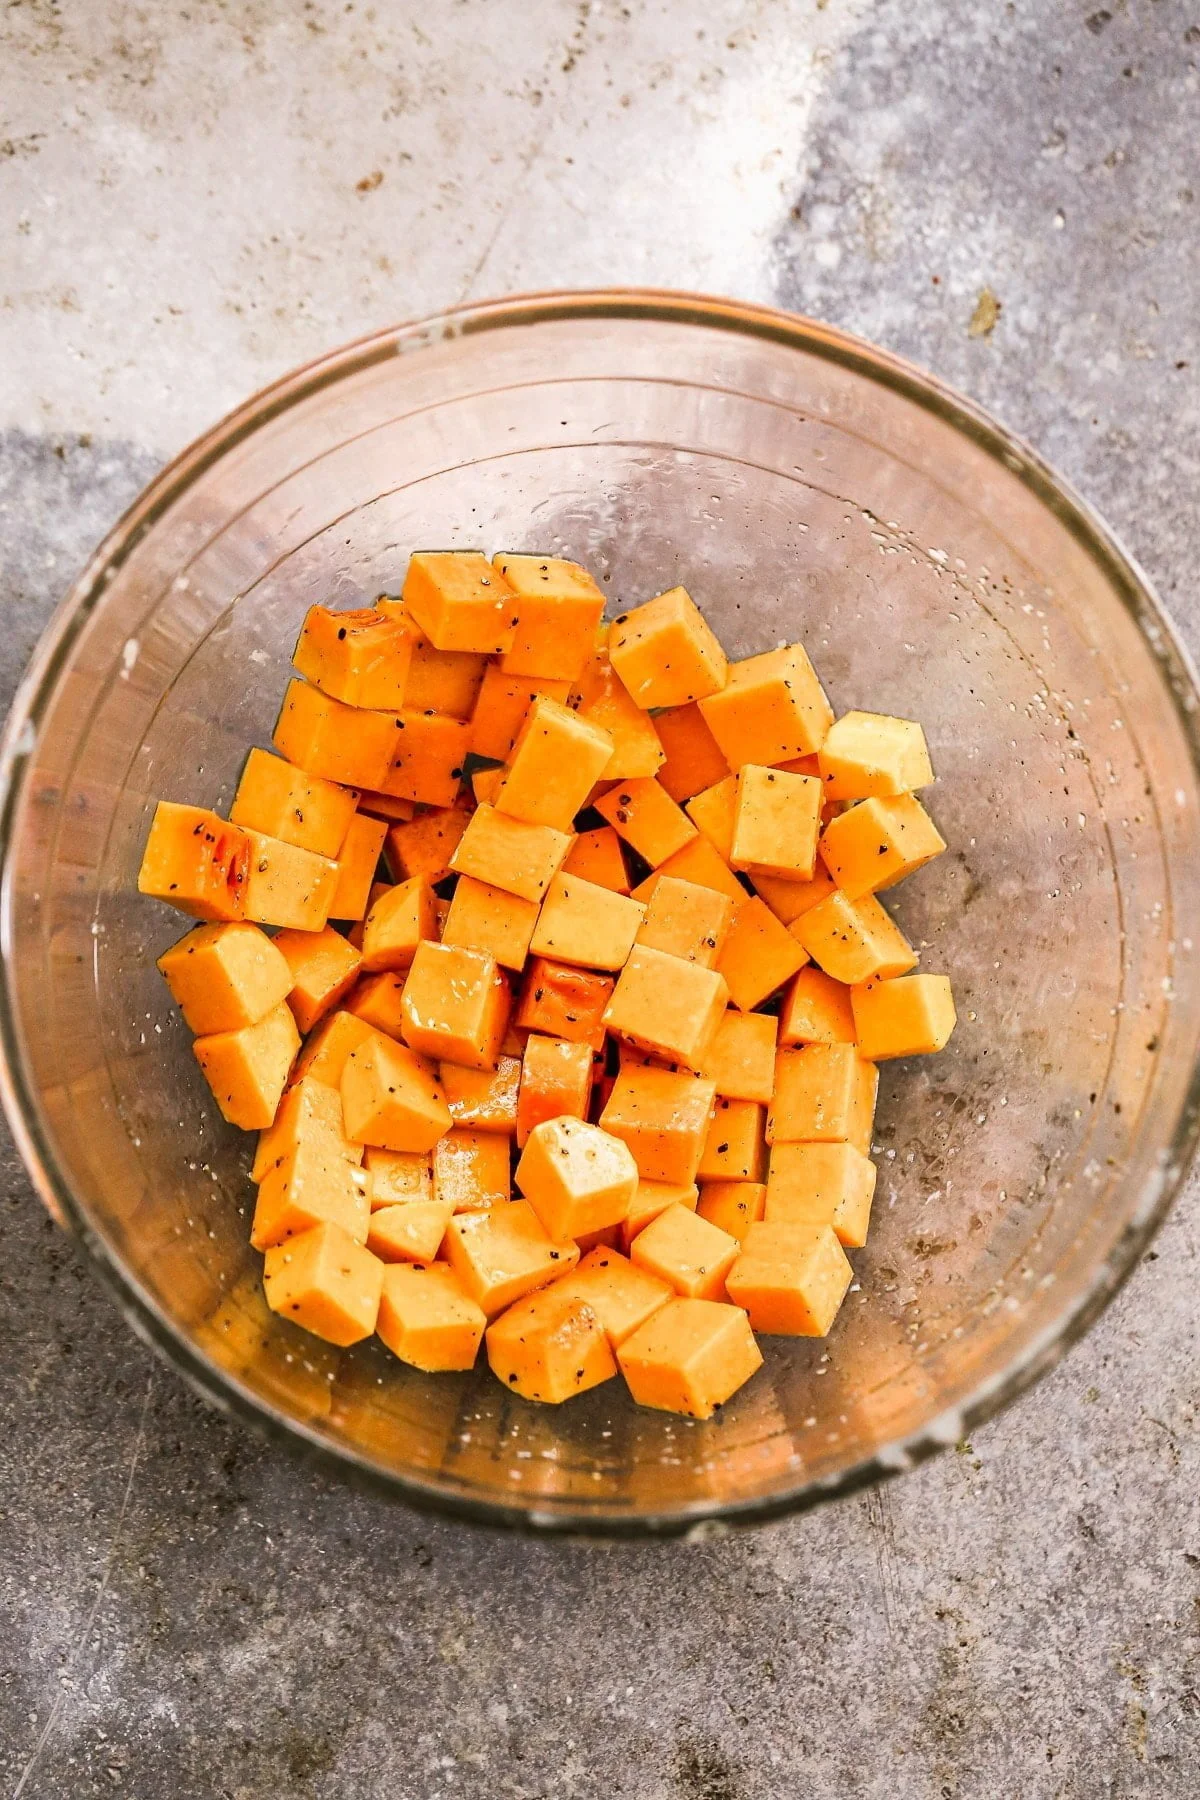 Diced butternut squash tossed in olive oil, salt and pepper